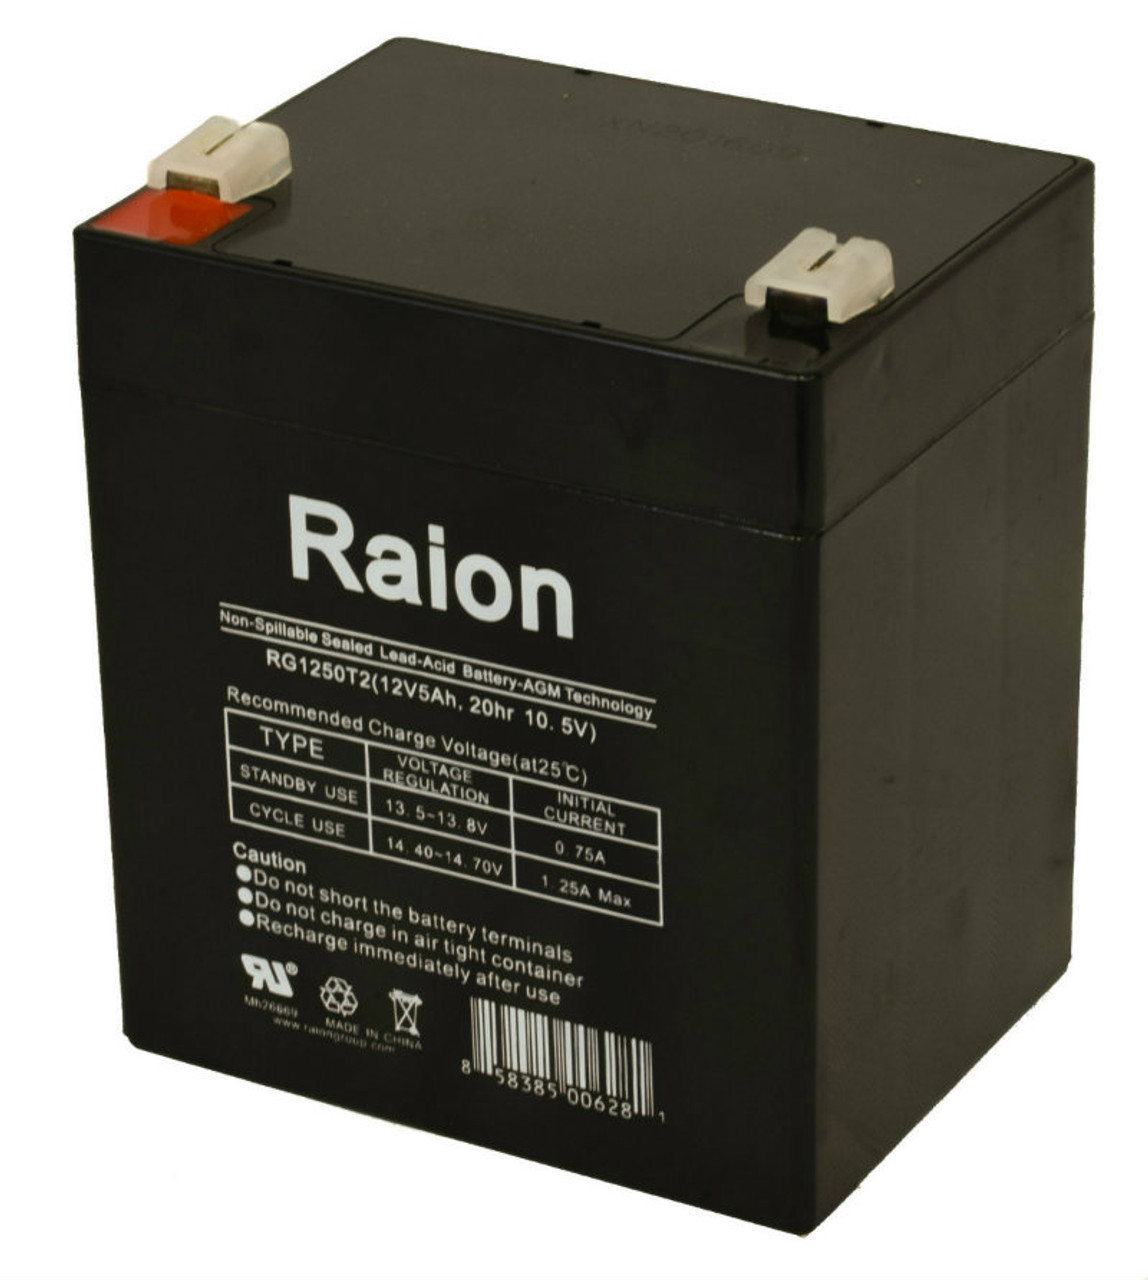 Raion Power RG1250T1 Replacement Alarm Security System Battery for Securitron XP1F